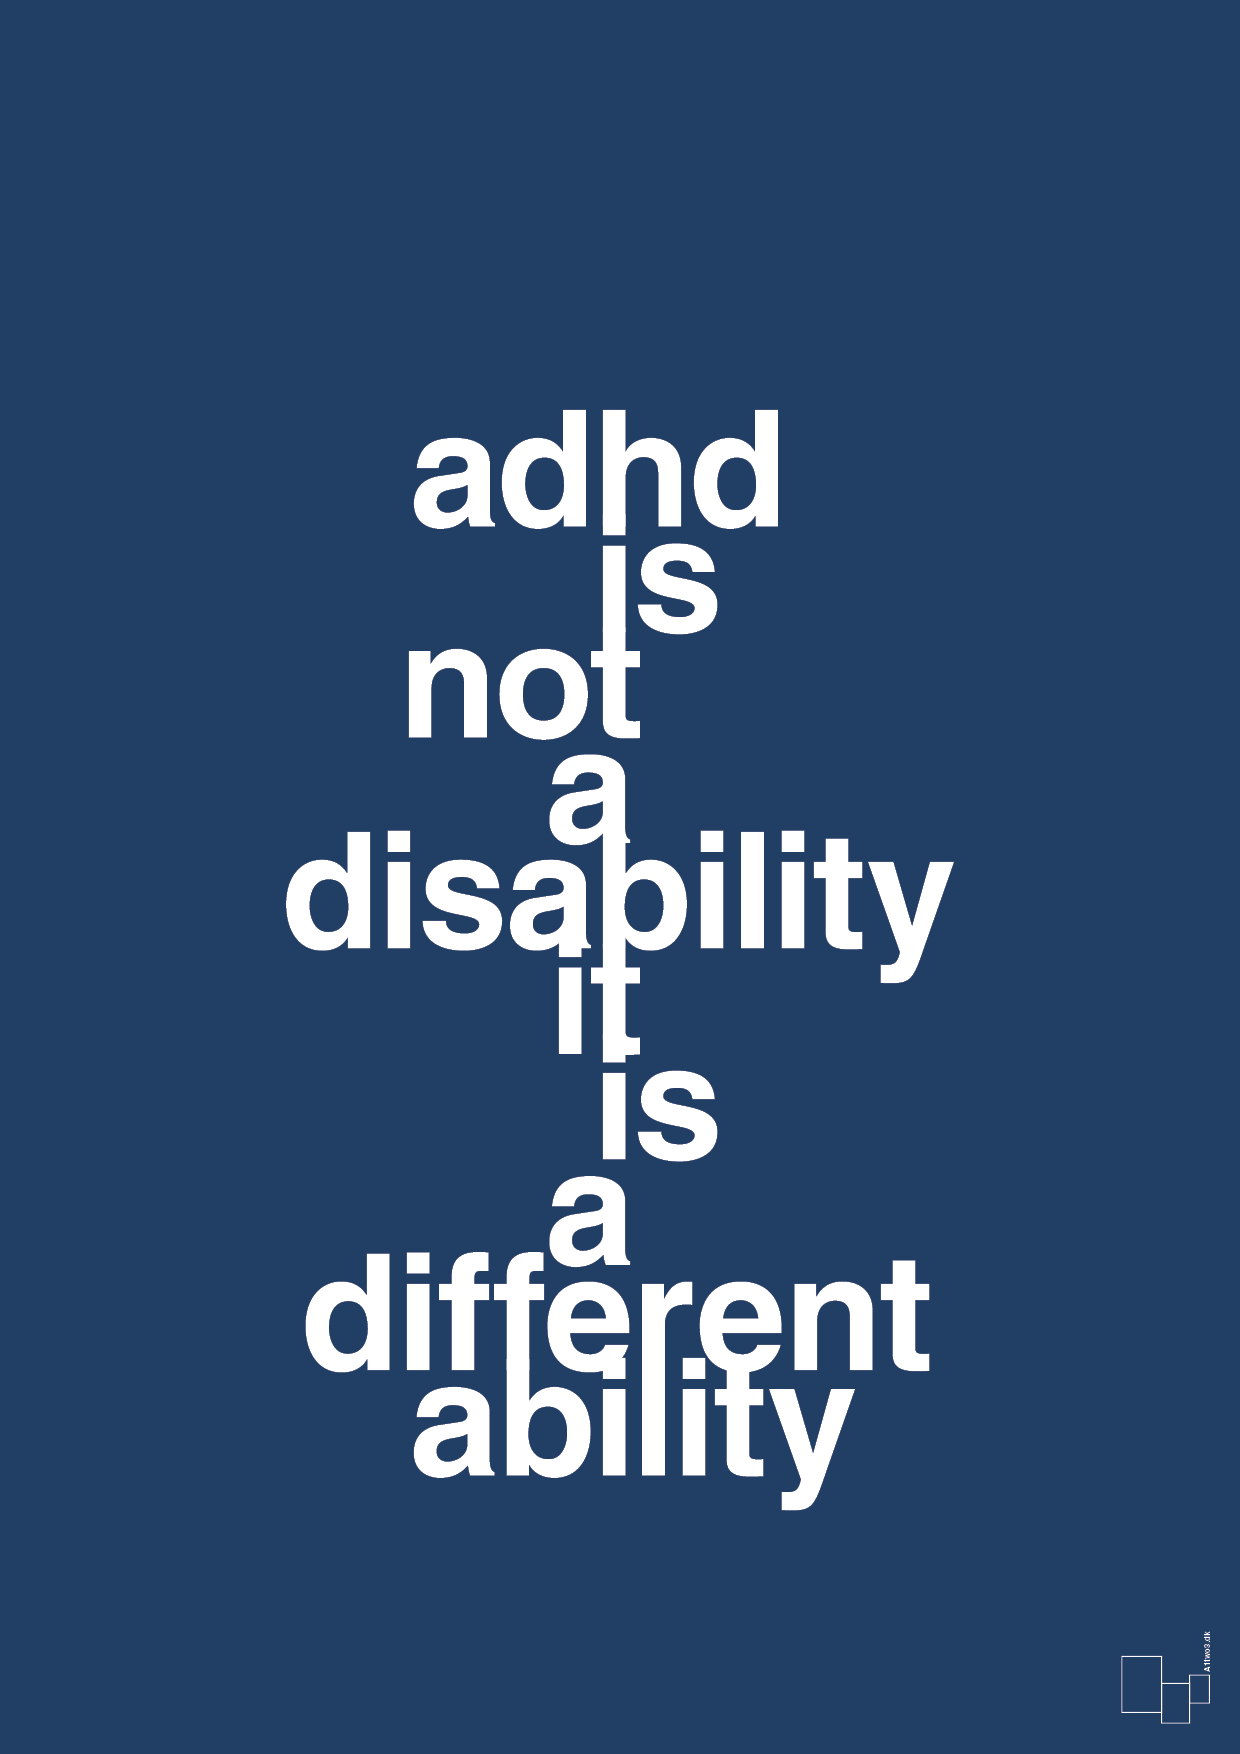 adhd is not a disability it is a different ability - Plakat med Samfund i Lapis Blue